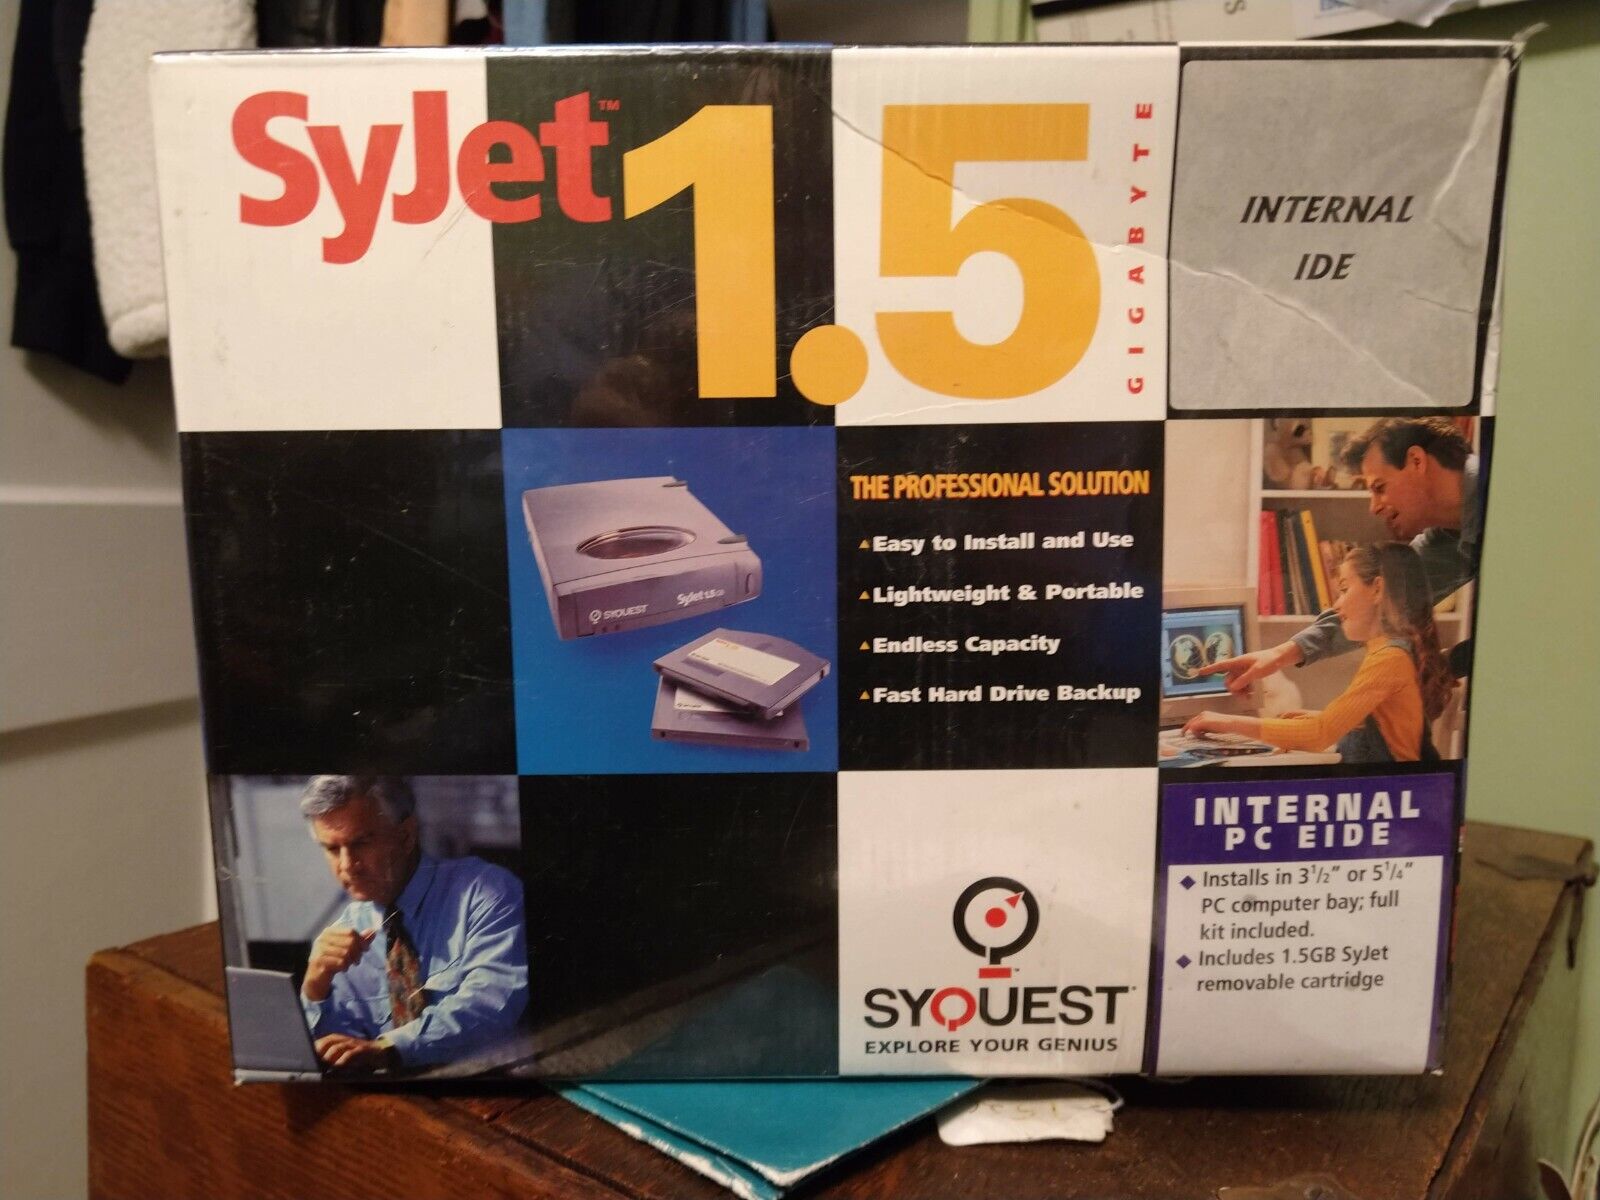 New Syquest SyJet 1.5 GB Internal IDE Drive Factory Sealed